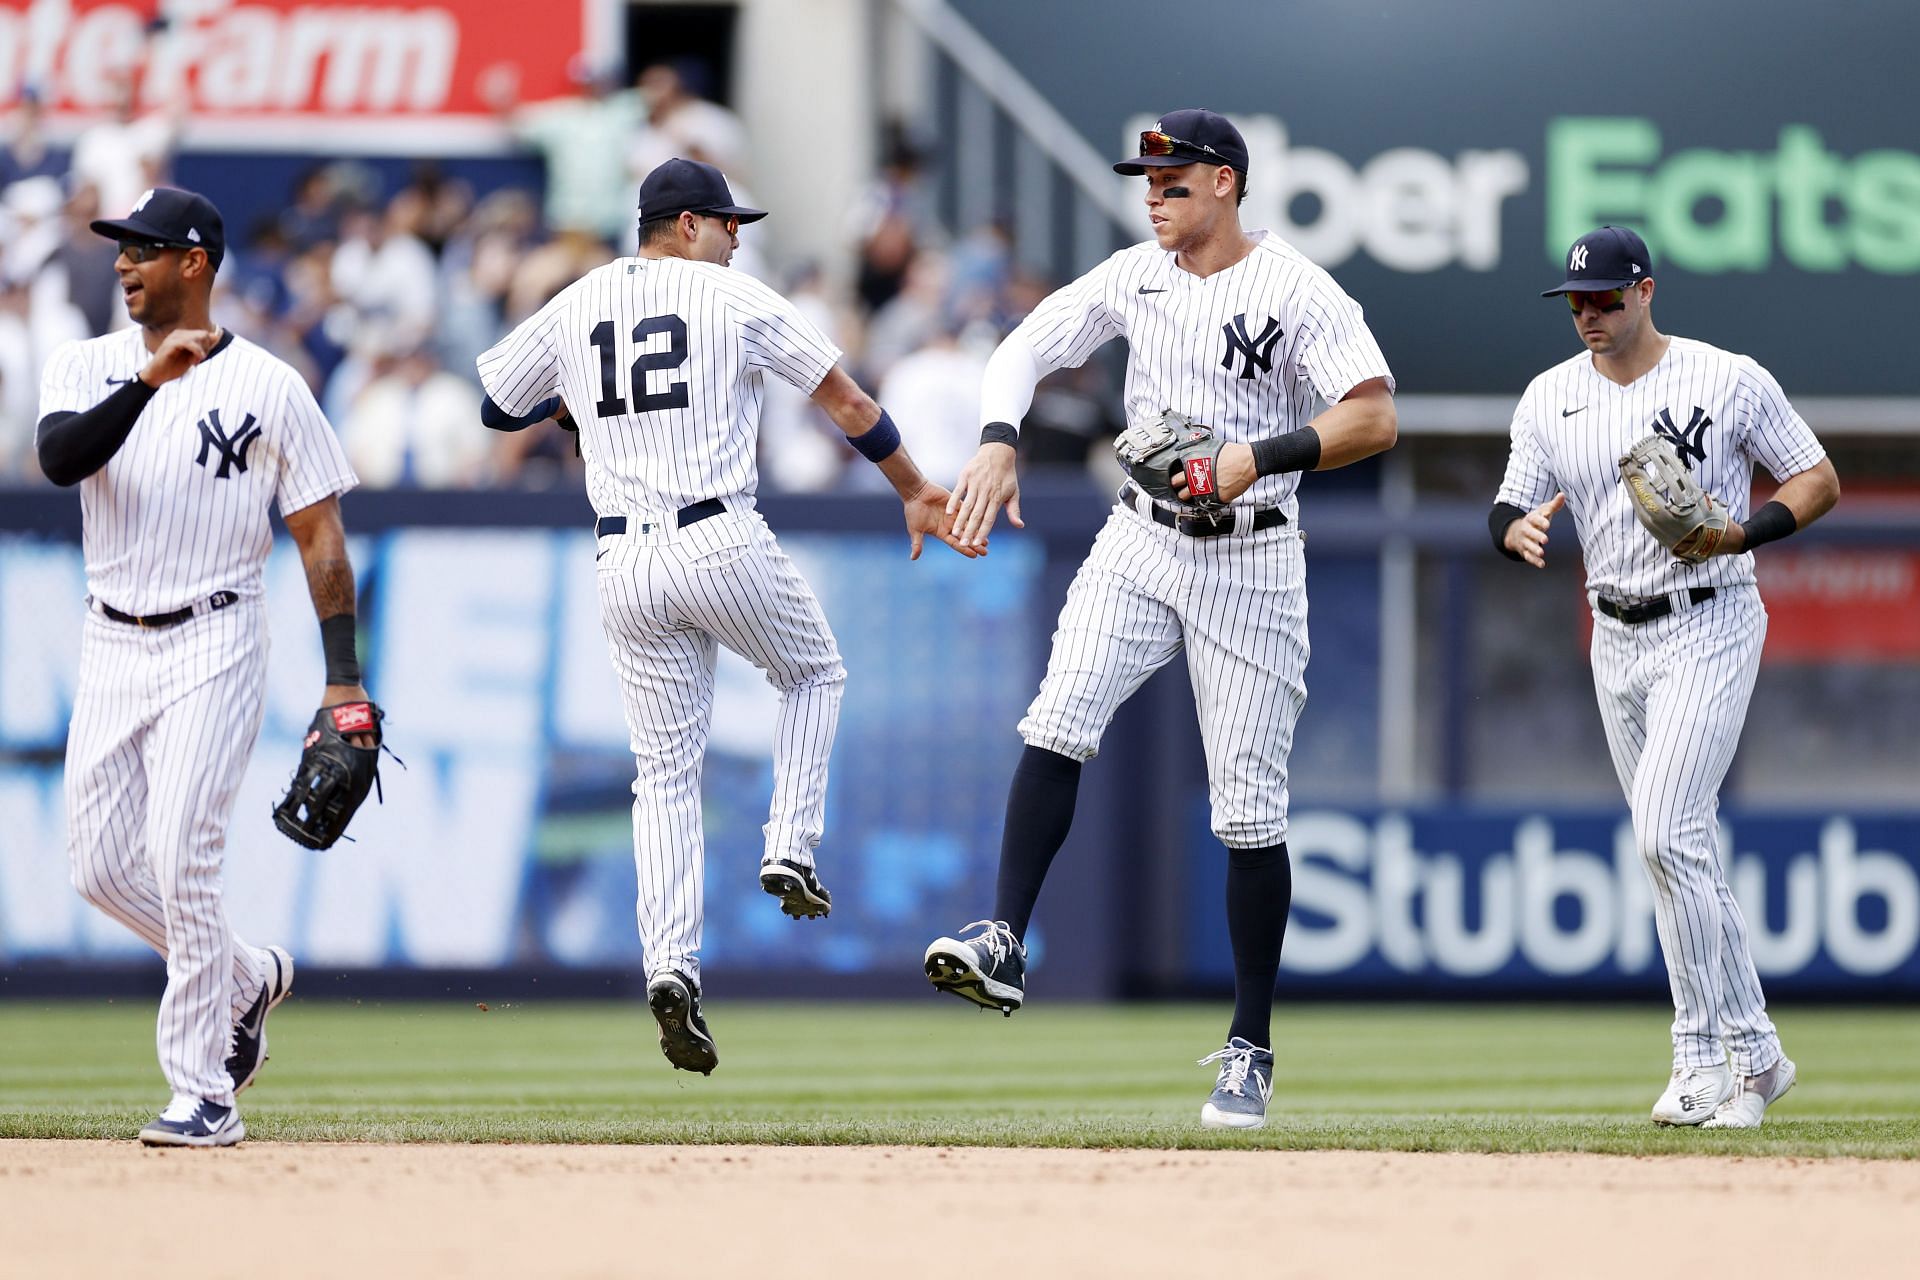 Aaron Judge celebrates with Isiah Kiner-Falefa during a New York Yankees v Detroit Tigers game.